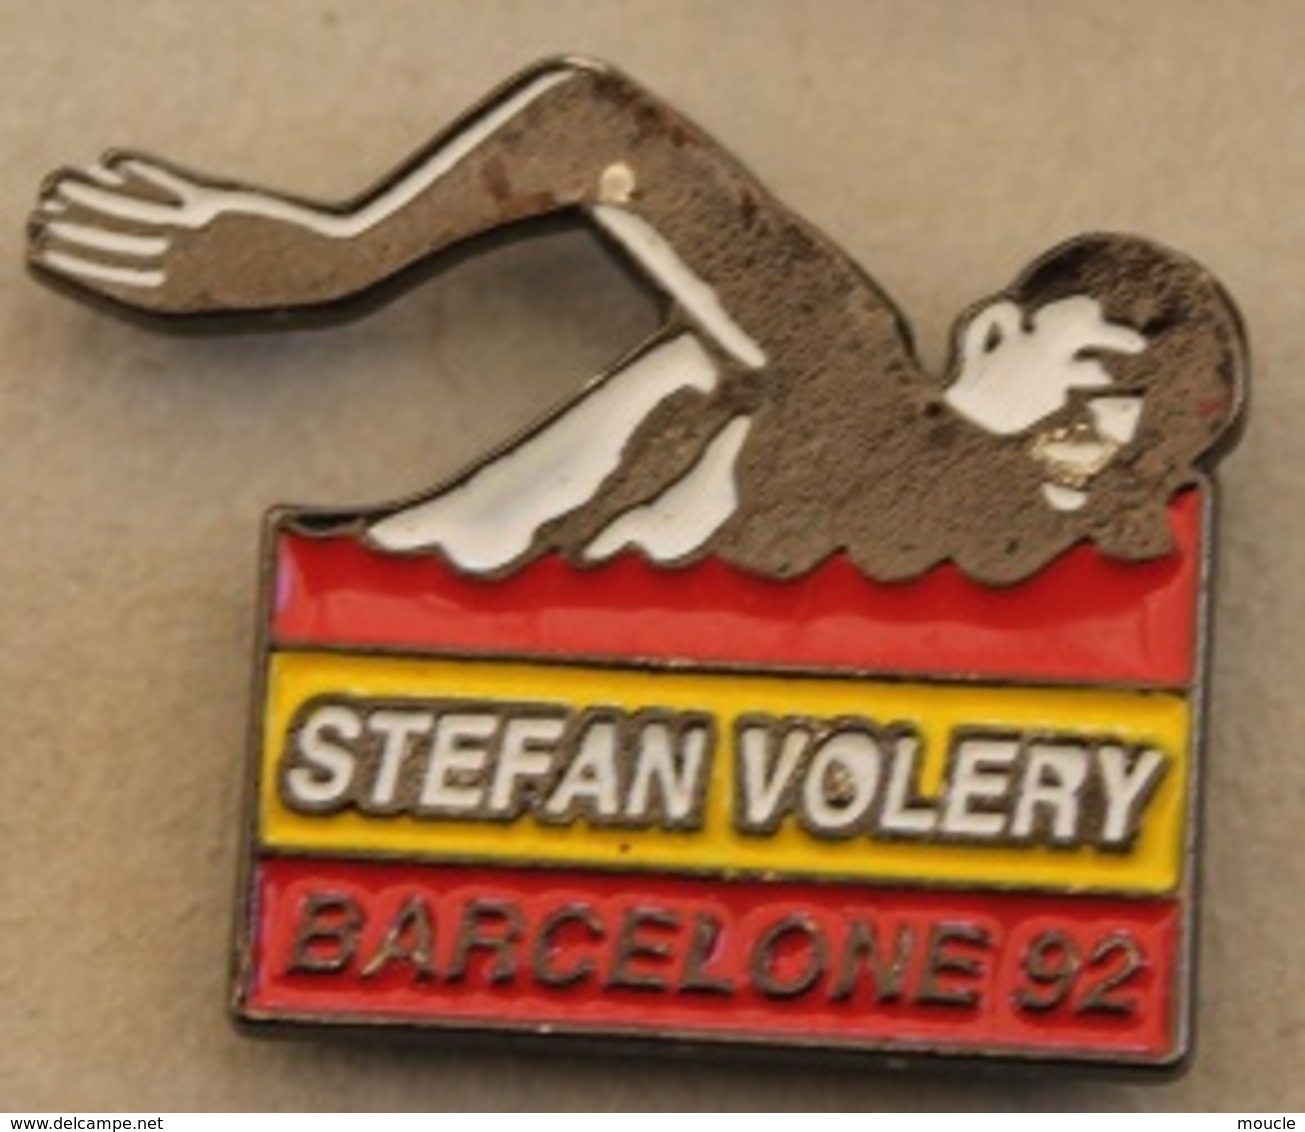 STEFAN VOLERY - BARCELONE 92 - JEUX OLYMPIQUES - NAGEUR SUISSE - PISCINE  -     (20) - Swimming